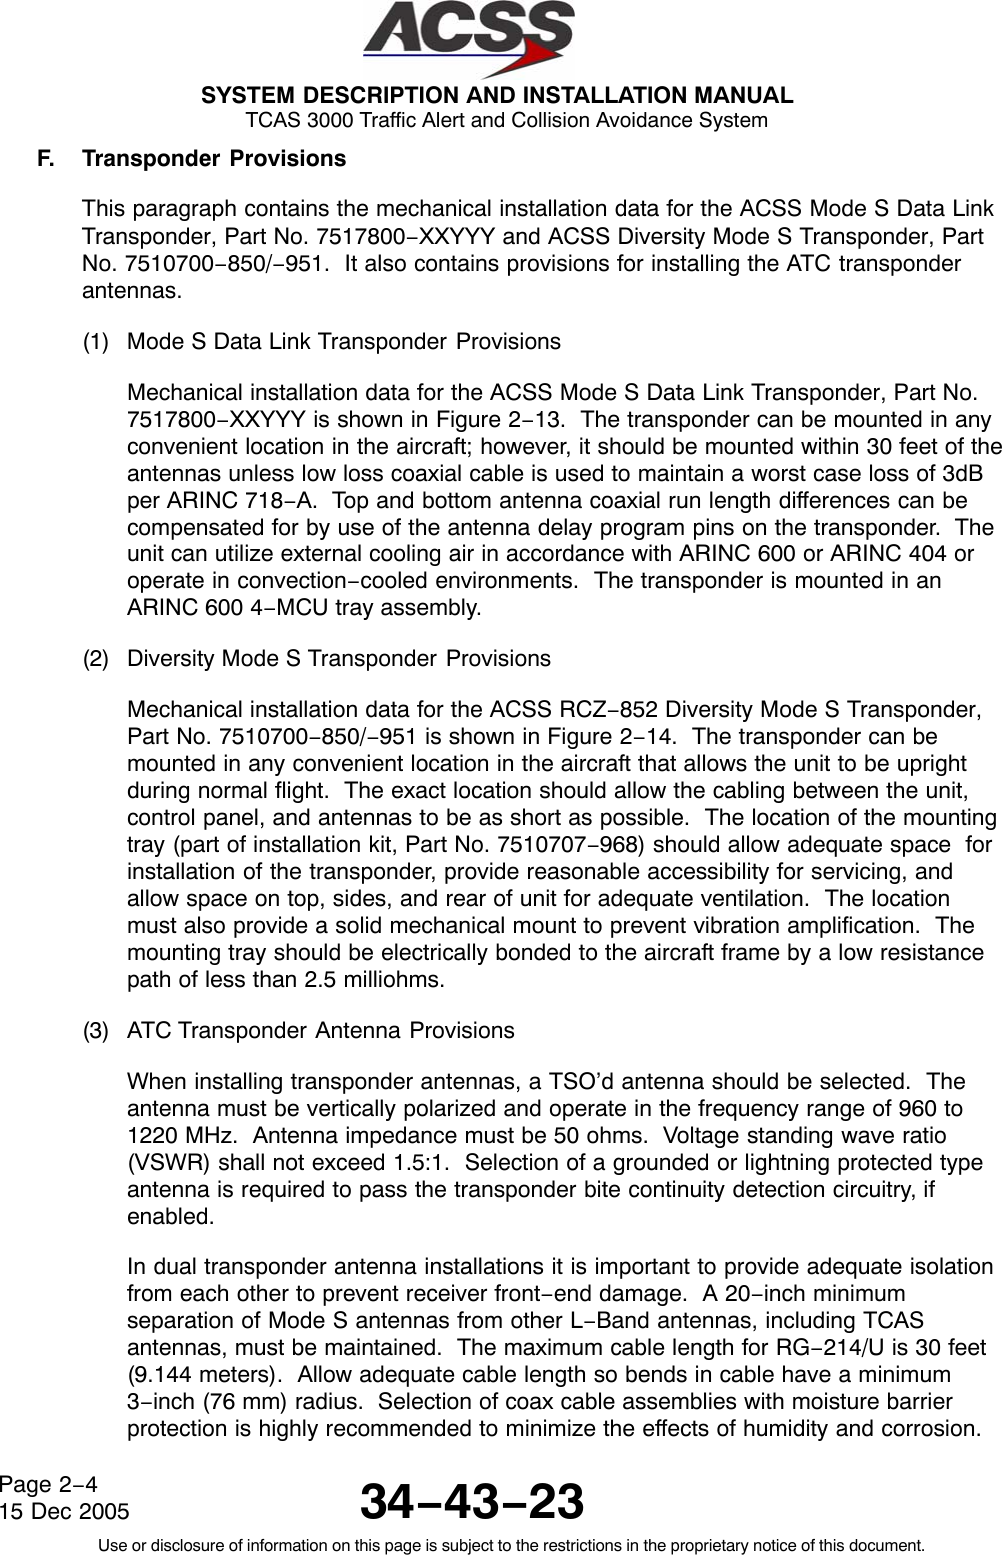  SYSTEM DESCRIPTION AND INSTALLATION MANUAL TCAS 3000 Traffic Alert and Collision Avoidance System34−43−23Use or disclosure of information on this page is subject to the restrictions in the proprietary notice of this document.Page 2−415 Dec 2005F. Transponder ProvisionsThis paragraph contains the mechanical installation data for the ACSS Mode S Data LinkTransponder, Part No. 7517800−XXYYY and ACSS Diversity Mode S Transponder, PartNo. 7510700−850/−951.  It also contains provisions for installing the ATC transponderantennas.(1) Mode S Data Link Transponder ProvisionsMechanical installation data for the ACSS Mode S Data Link Transponder, Part No.7517800−XXYYY is shown in Figure 2−13.  The transponder can be mounted in anyconvenient location in the aircraft; however, it should be mounted within 30 feet of theantennas unless low loss coaxial cable is used to maintain a worst case loss of 3dBper ARINC 718−A.  Top and bottom antenna coaxial run length differences can becompensated for by use of the antenna delay program pins on the transponder.  Theunit can utilize external cooling air in accordance with ARINC 600 or ARINC 404 oroperate in convection−cooled environments.  The transponder is mounted in anARINC 600 4−MCU tray assembly.(2) Diversity Mode S Transponder ProvisionsMechanical installation data for the ACSS RCZ−852 Diversity Mode S Transponder,Part No. 7510700−850/−951 is shown in Figure 2−14.  The transponder can bemounted in any convenient location in the aircraft that allows the unit to be uprightduring normal flight.  The exact location should allow the cabling between the unit,control panel, and antennas to be as short as possible.  The location of the mountingtray (part of installation kit, Part No. 7510707−968) should allow adequate space  forinstallation of the transponder, provide reasonable accessibility for servicing, andallow space on top, sides, and rear of unit for adequate ventilation.  The locationmust also provide a solid mechanical mount to prevent vibration amplification.  Themounting tray should be electrically bonded to the aircraft frame by a low resistancepath of less than 2.5 milliohms.(3) ATC Transponder Antenna ProvisionsWhen installing transponder antennas, a TSO’d antenna should be selected.  Theantenna must be vertically polarized and operate in the frequency range of 960 to1220 MHz.  Antenna impedance must be 50 ohms.  Voltage standing wave ratio(VSWR) shall not exceed 1.5:1.  Selection of a grounded or lightning protected typeantenna is required to pass the transponder bite continuity detection circuitry, ifenabled.In dual transponder antenna installations it is important to provide adequate isolationfrom each other to prevent receiver front−end damage.  A 20−inch minimumseparation of Mode S antennas from other L−Band antennas, including TCASantennas, must be maintained.  The maximum cable length for RG−214/U is 30 feet(9.144 meters).  Allow adequate cable length so bends in cable have a minimum3−inch (76 mm) radius.  Selection of coax cable assemblies with moisture barrierprotection is highly recommended to minimize the effects of humidity and corrosion.